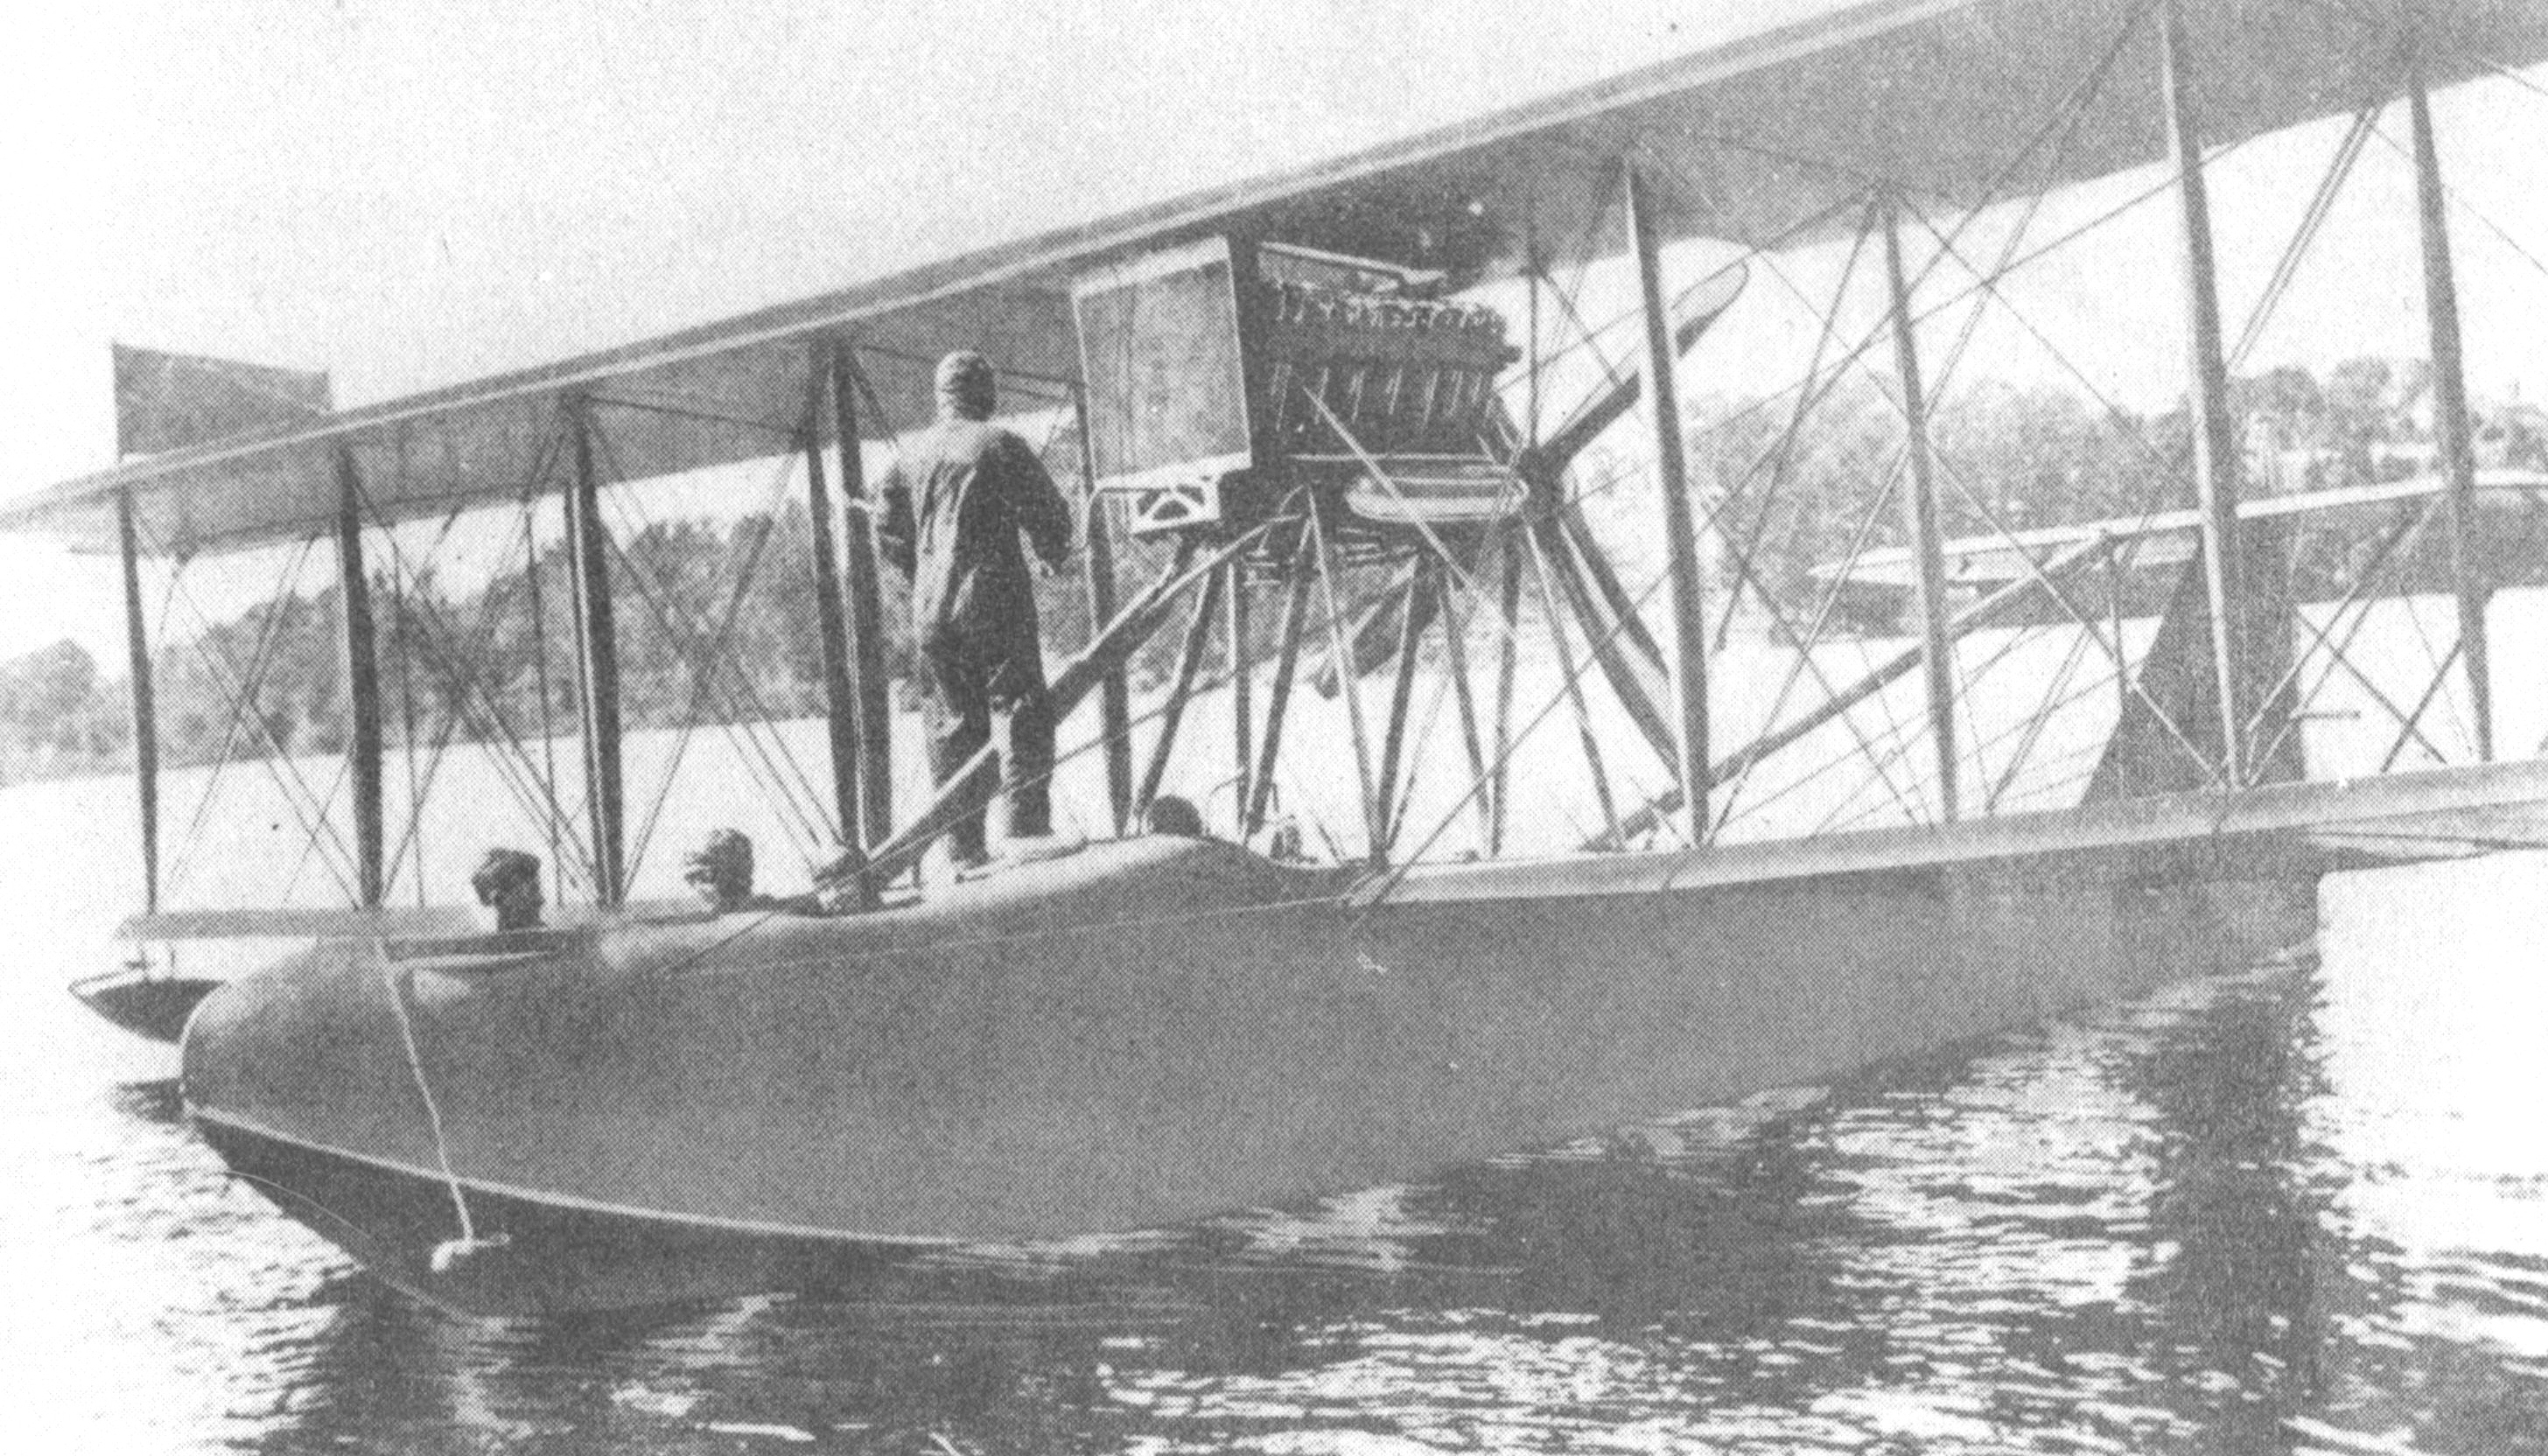 Bishop Barker Aeroplanes founded an early commercial airline. Here is shown an HS2L biplane parked in a lake readying to takeoff.